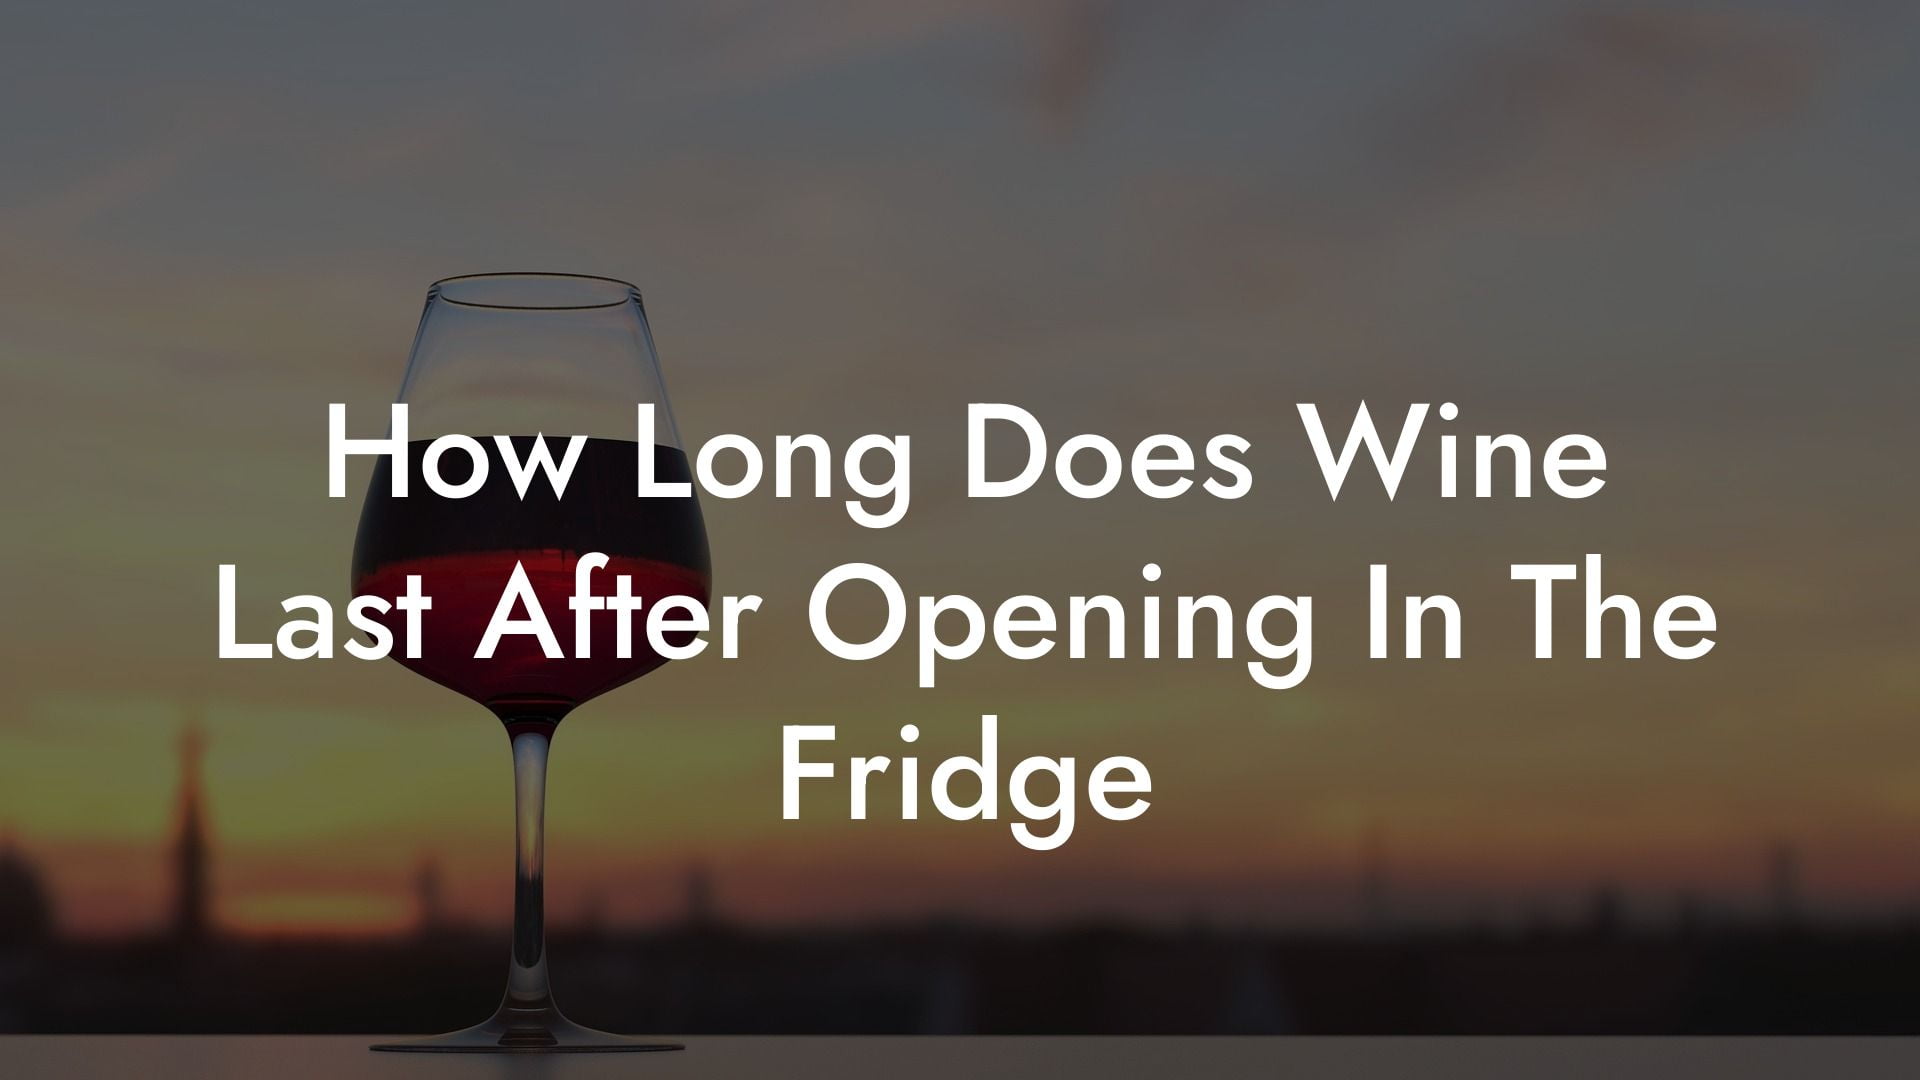 How Long Does Wine Last After Opening In The Fridge